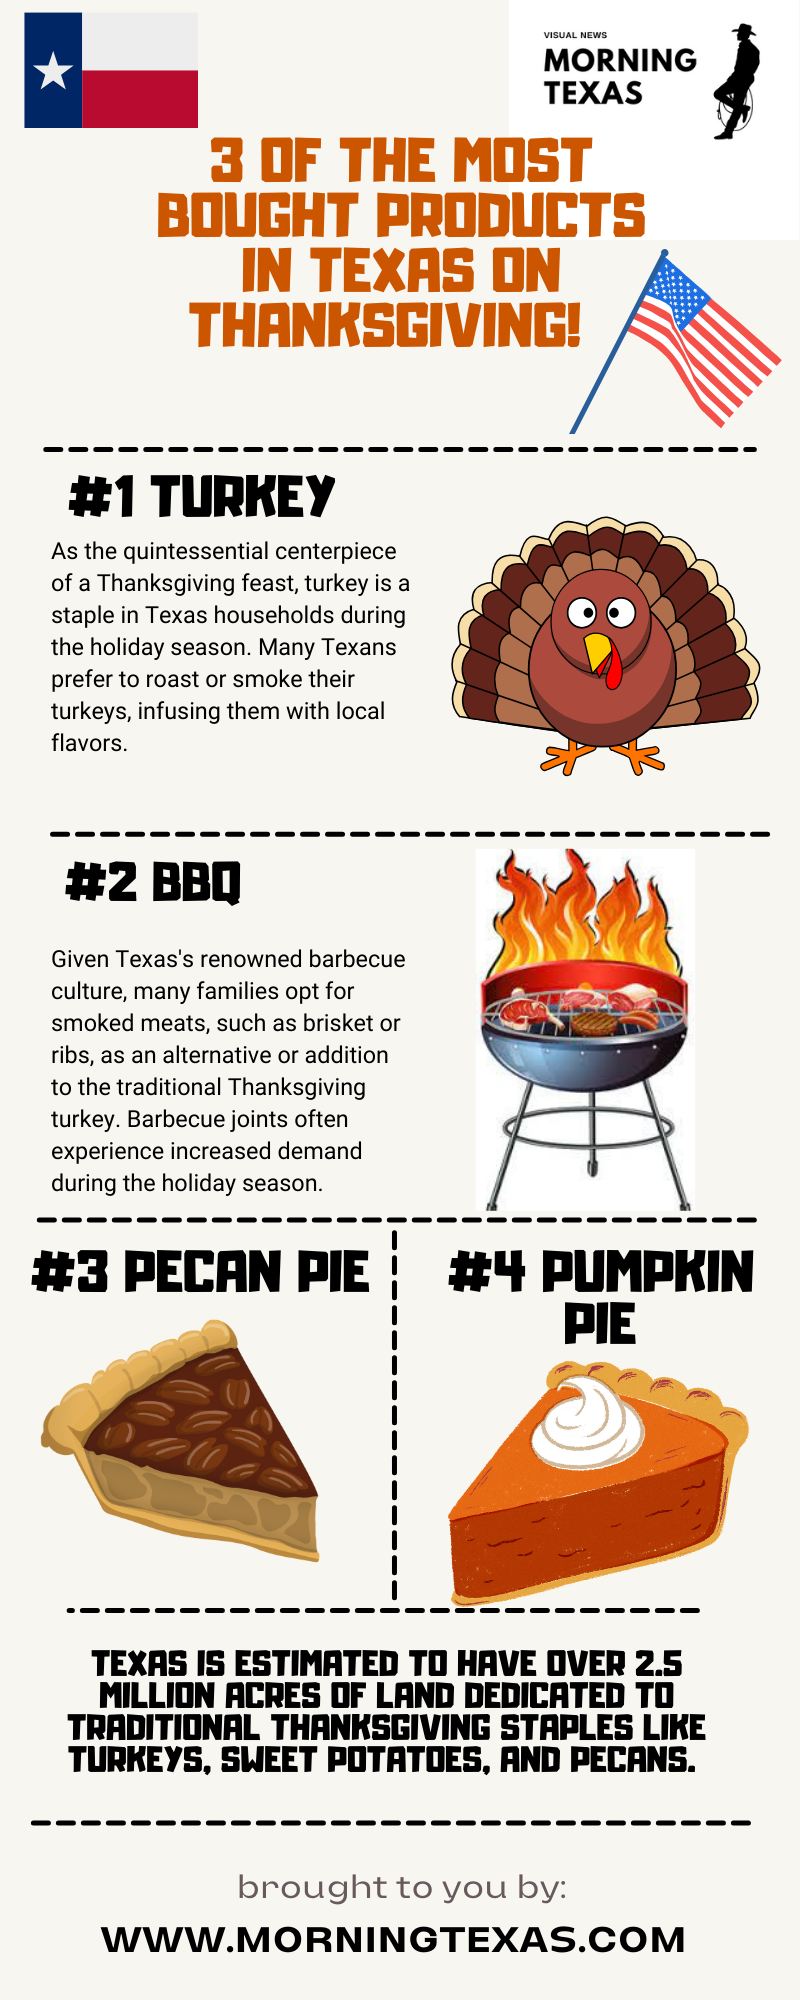 3 of the most bought Thanksgiving products